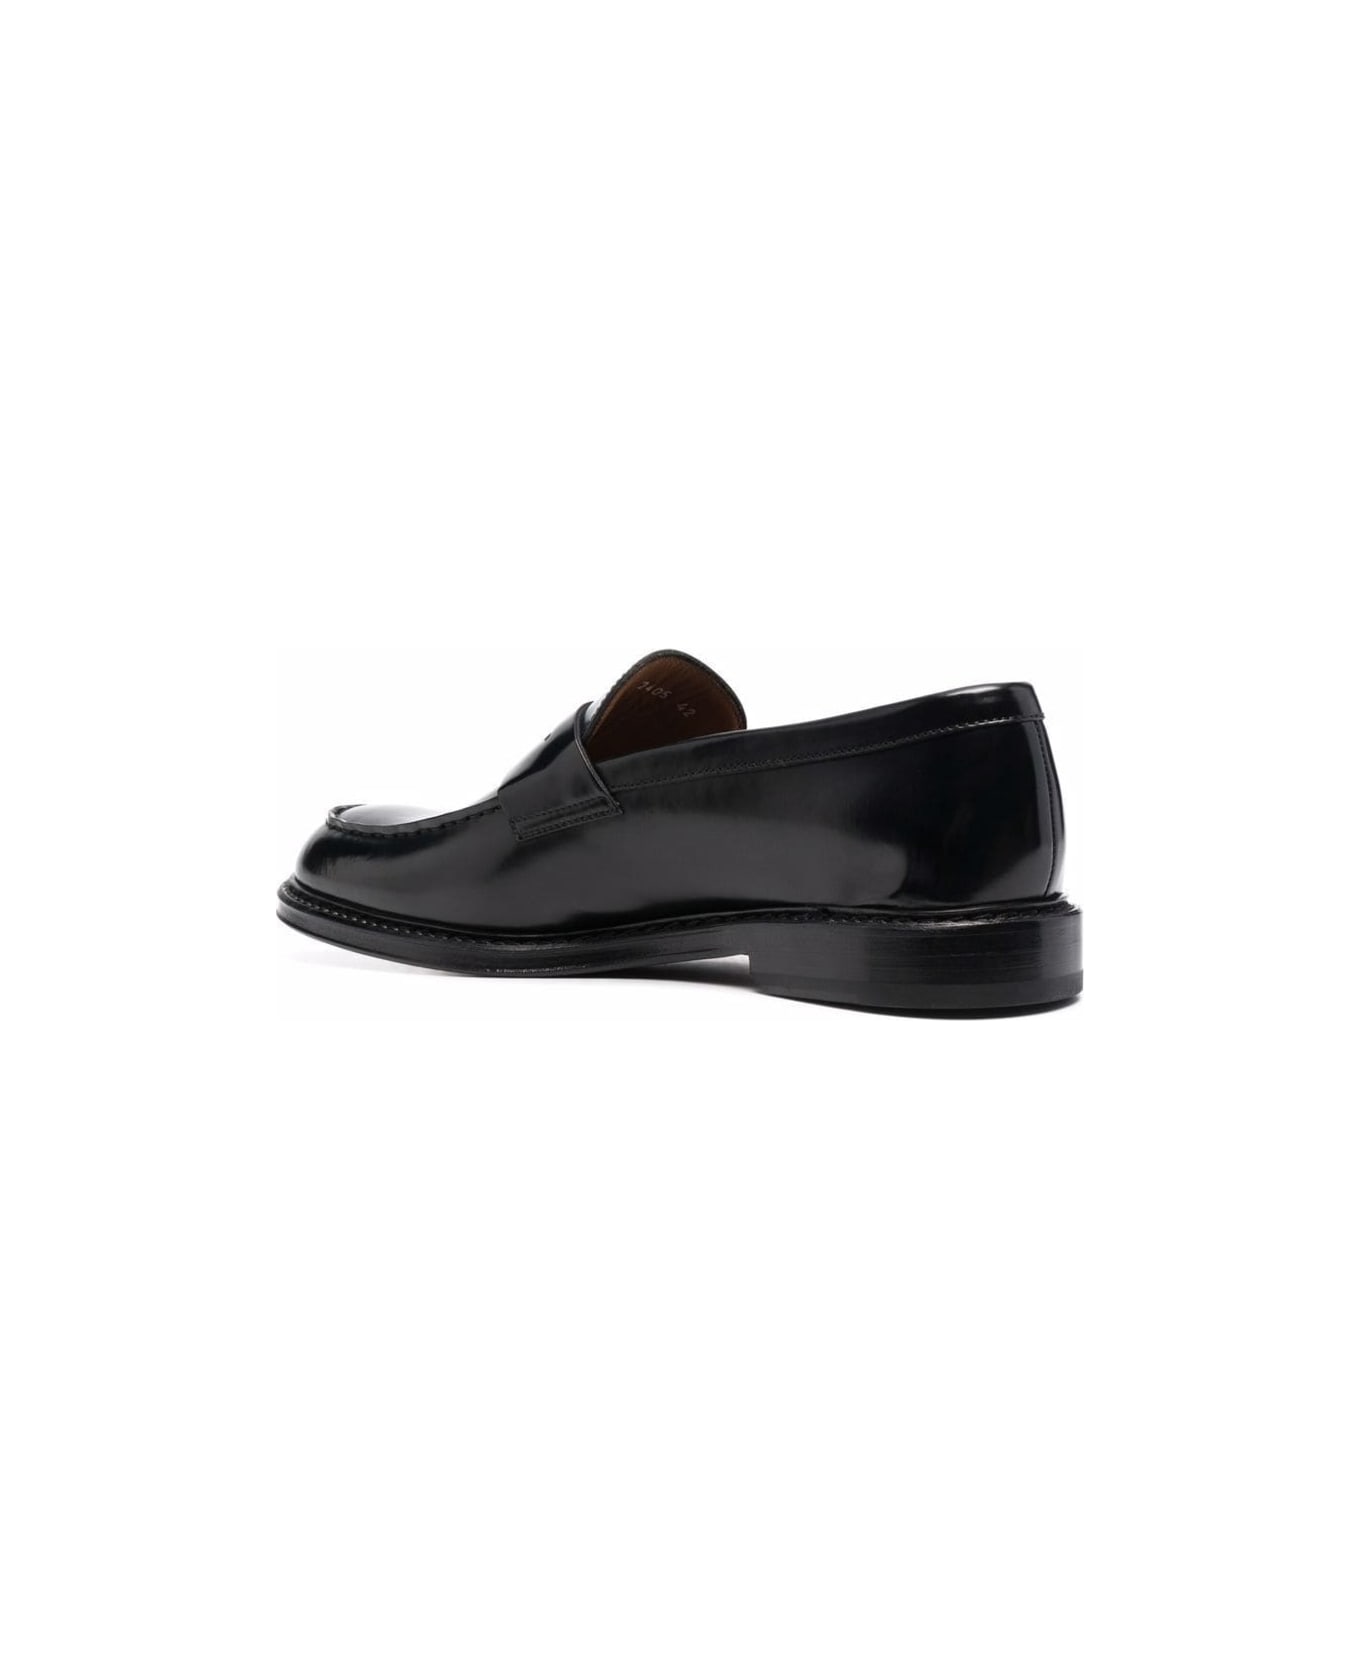 Doucal's Black Slip-on Loafers With Round Toe In Patent Leather Man - Black ローファー＆デッキシューズ